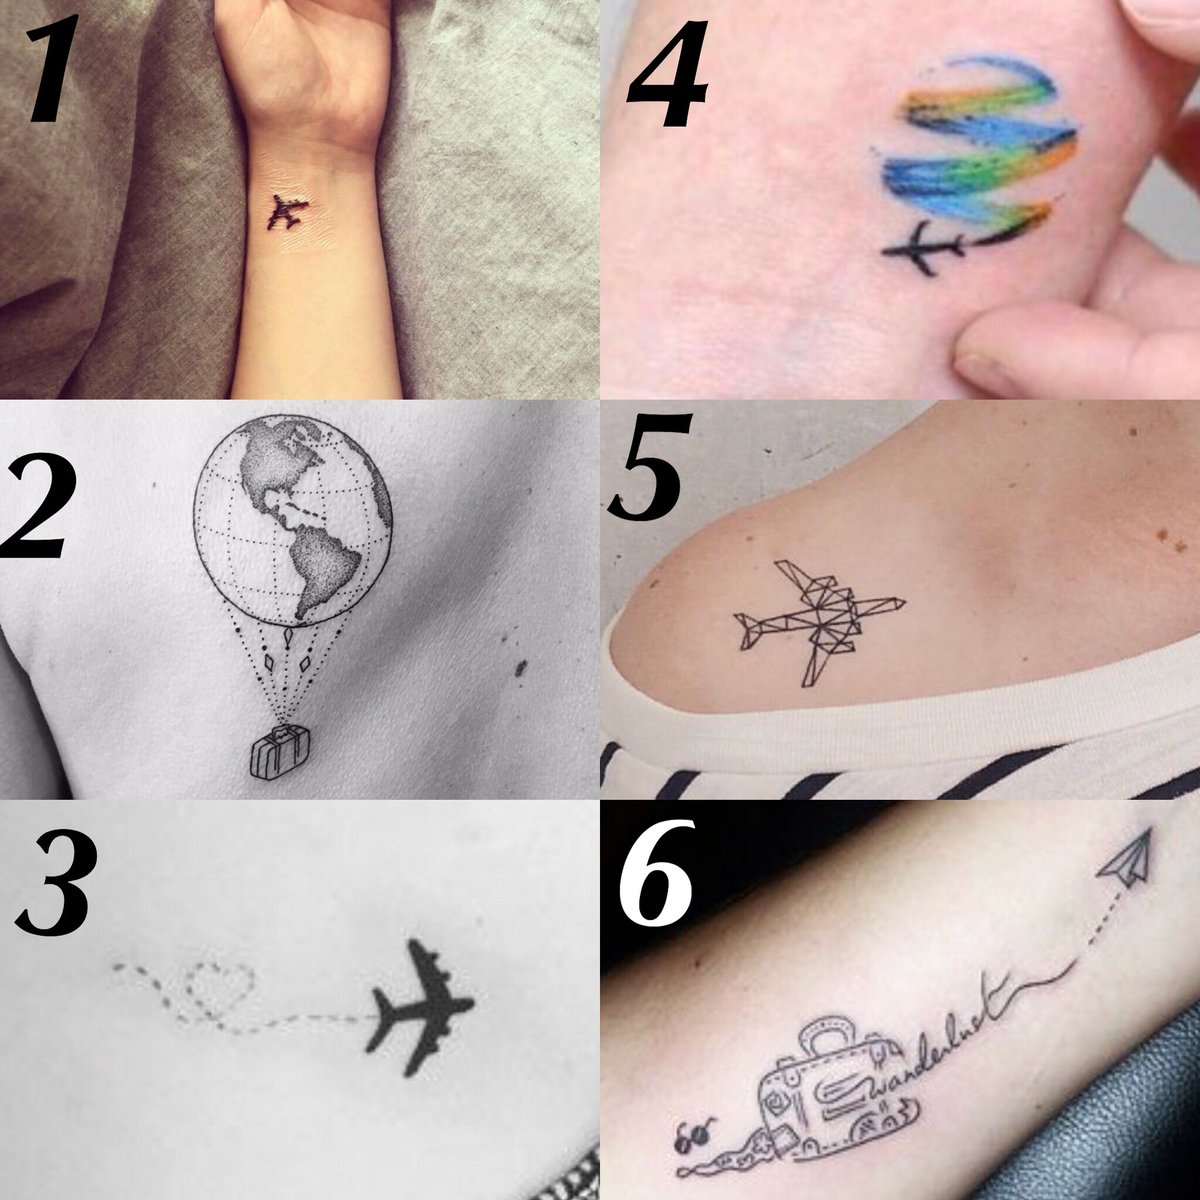 Beautiful Airplane Tattoo Ideas For Travel Lovers - YouTube